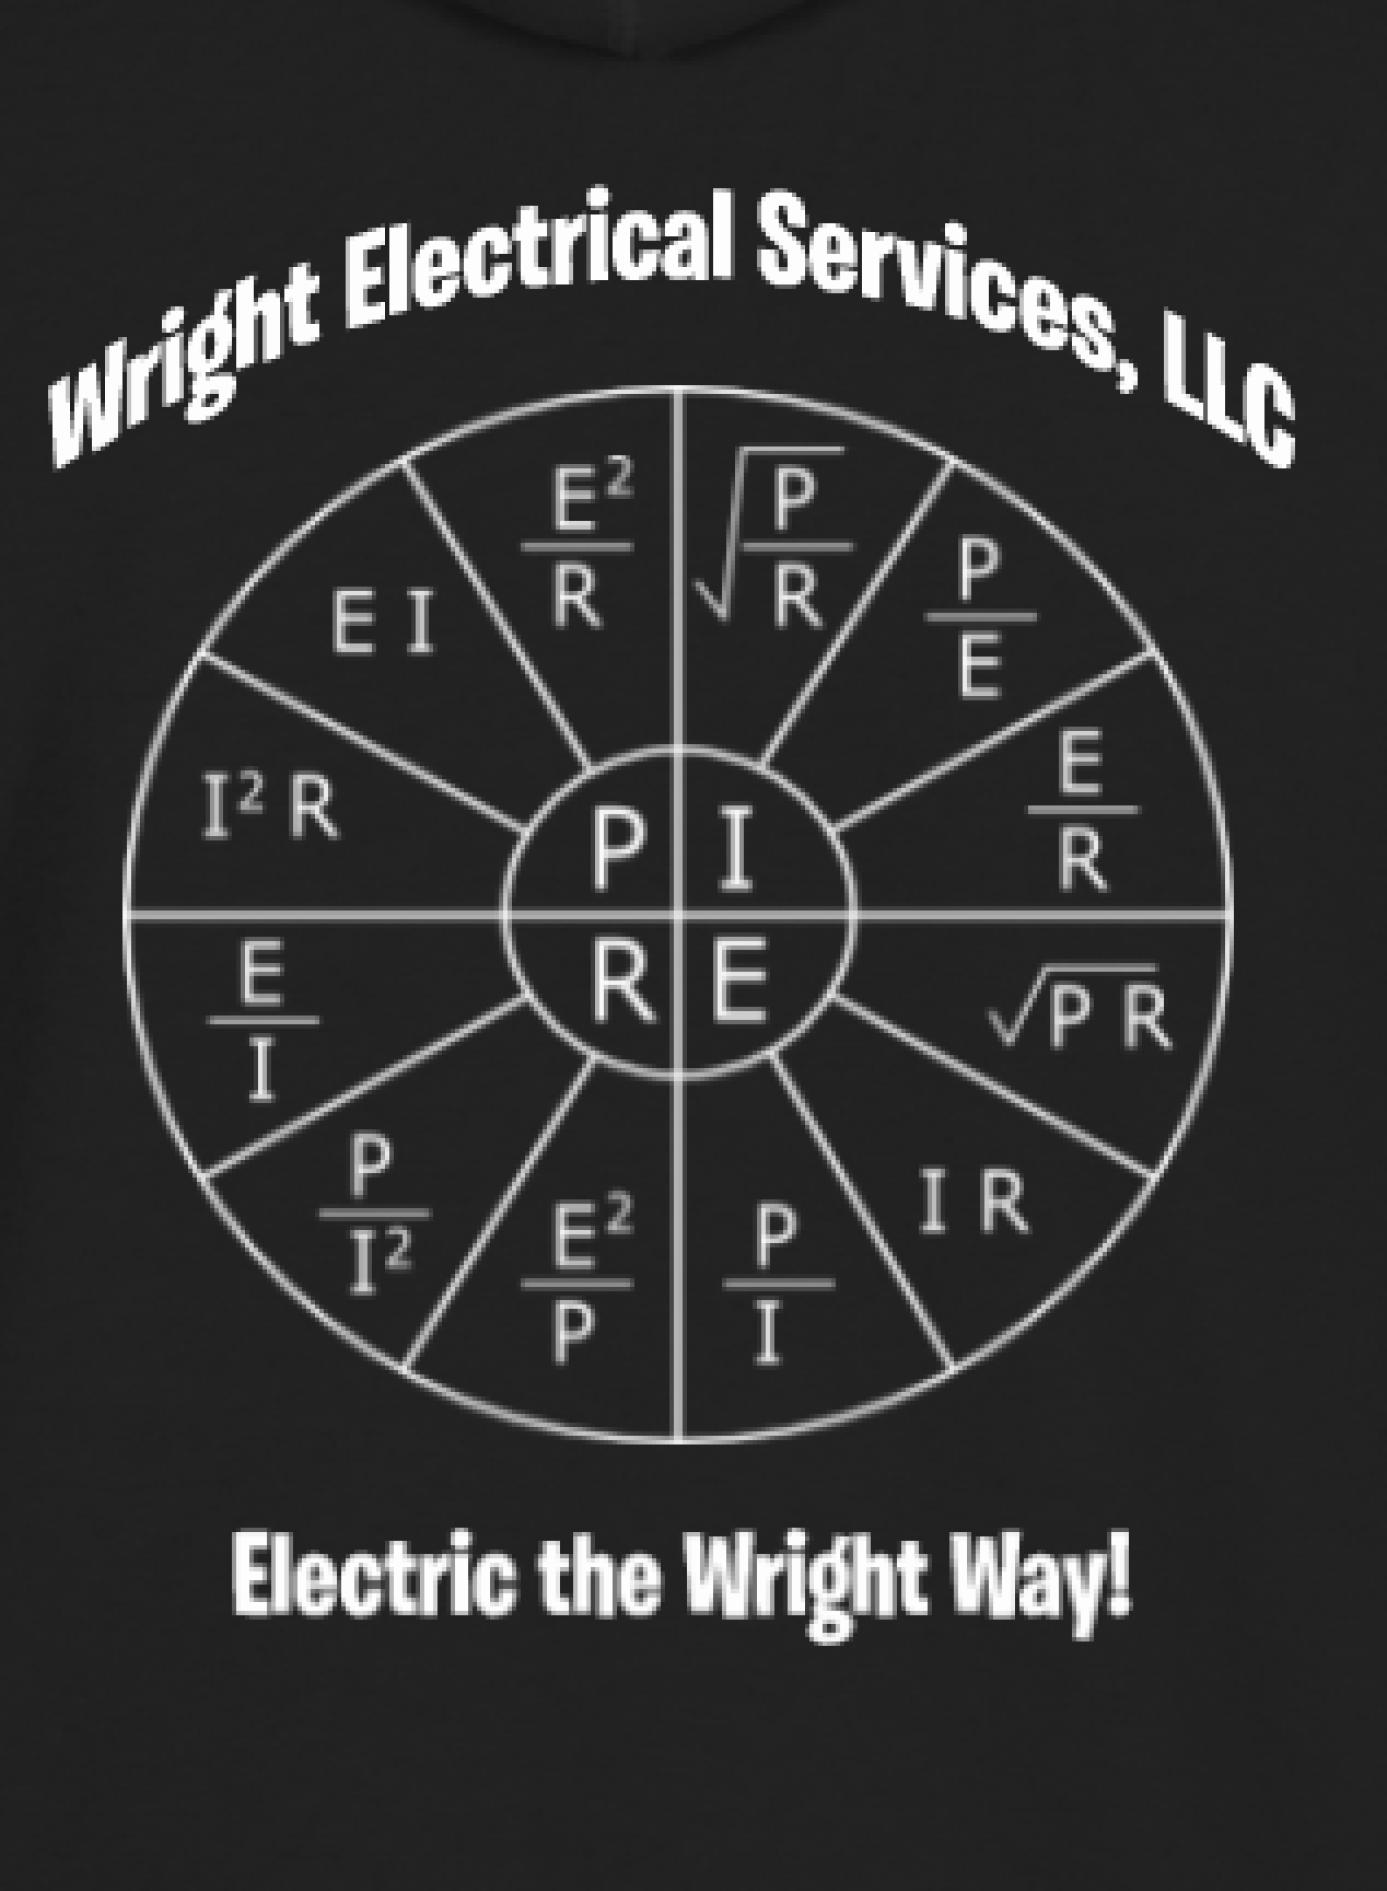 Wright Electrical Services, LLC Logo